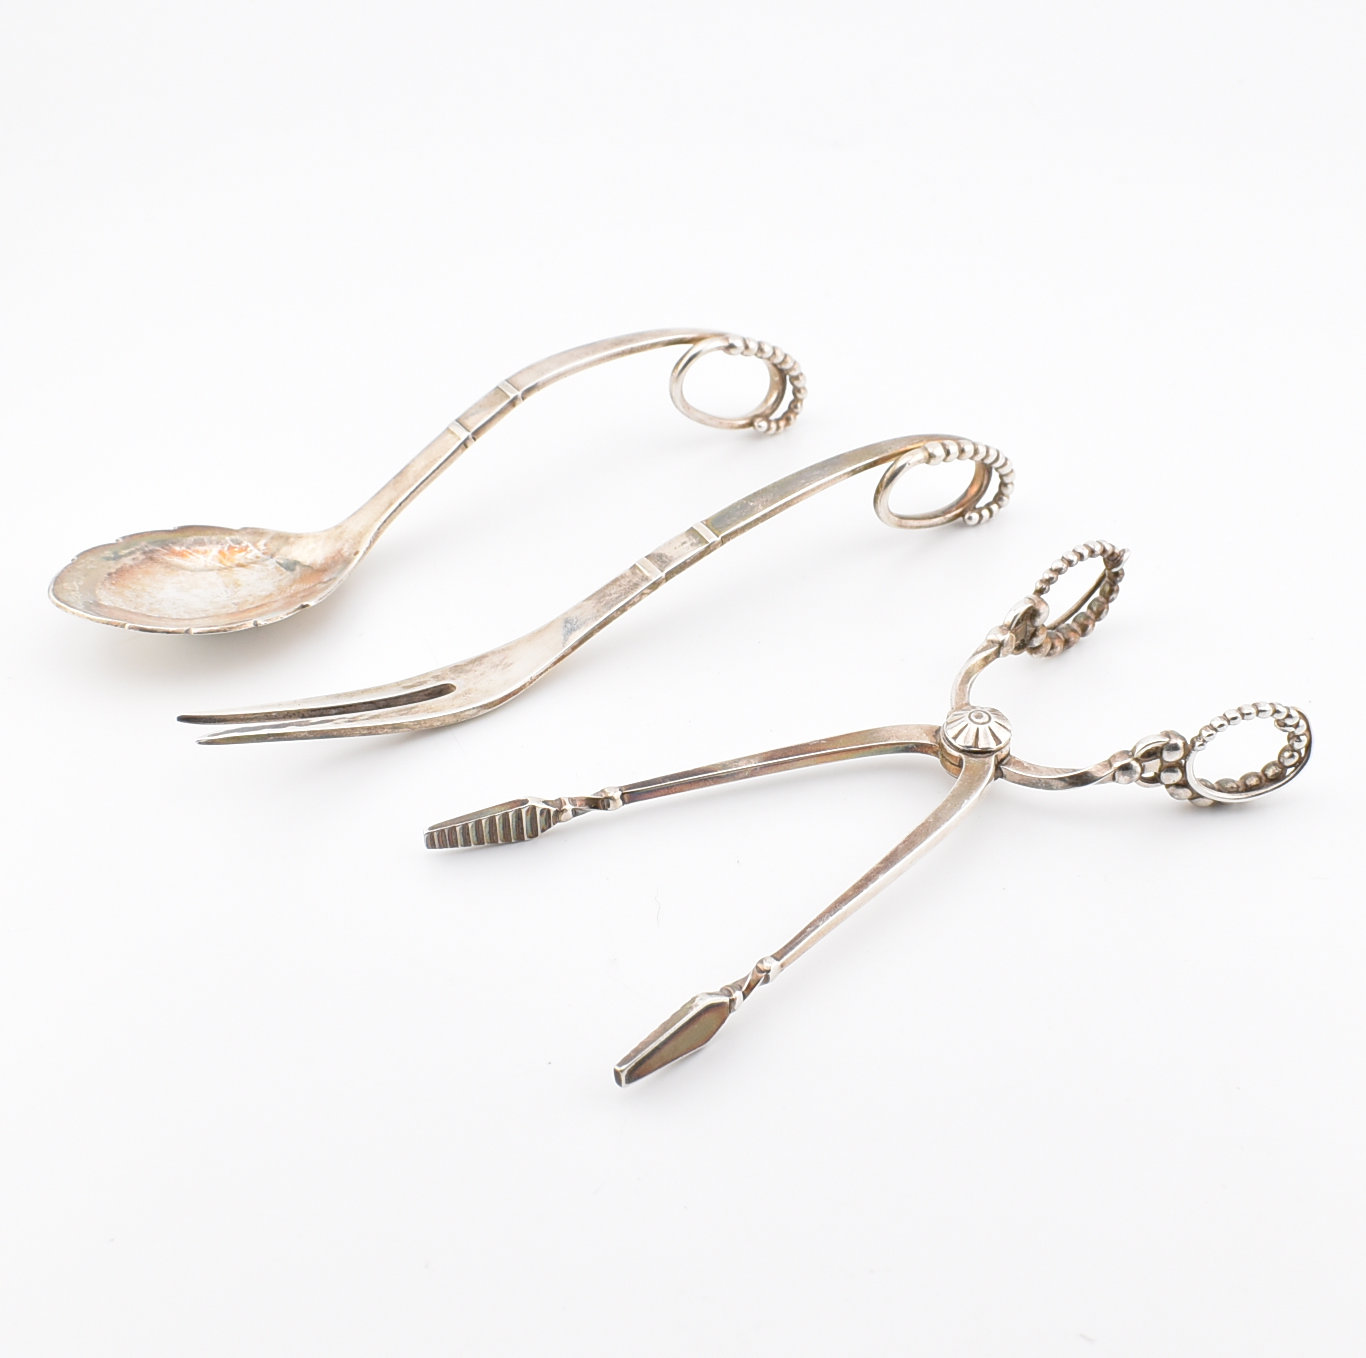 GEORG JENSEN SILVER ORNAMENTAL COLLECTION SPOON FORK TONGS 1918C - Image 3 of 9